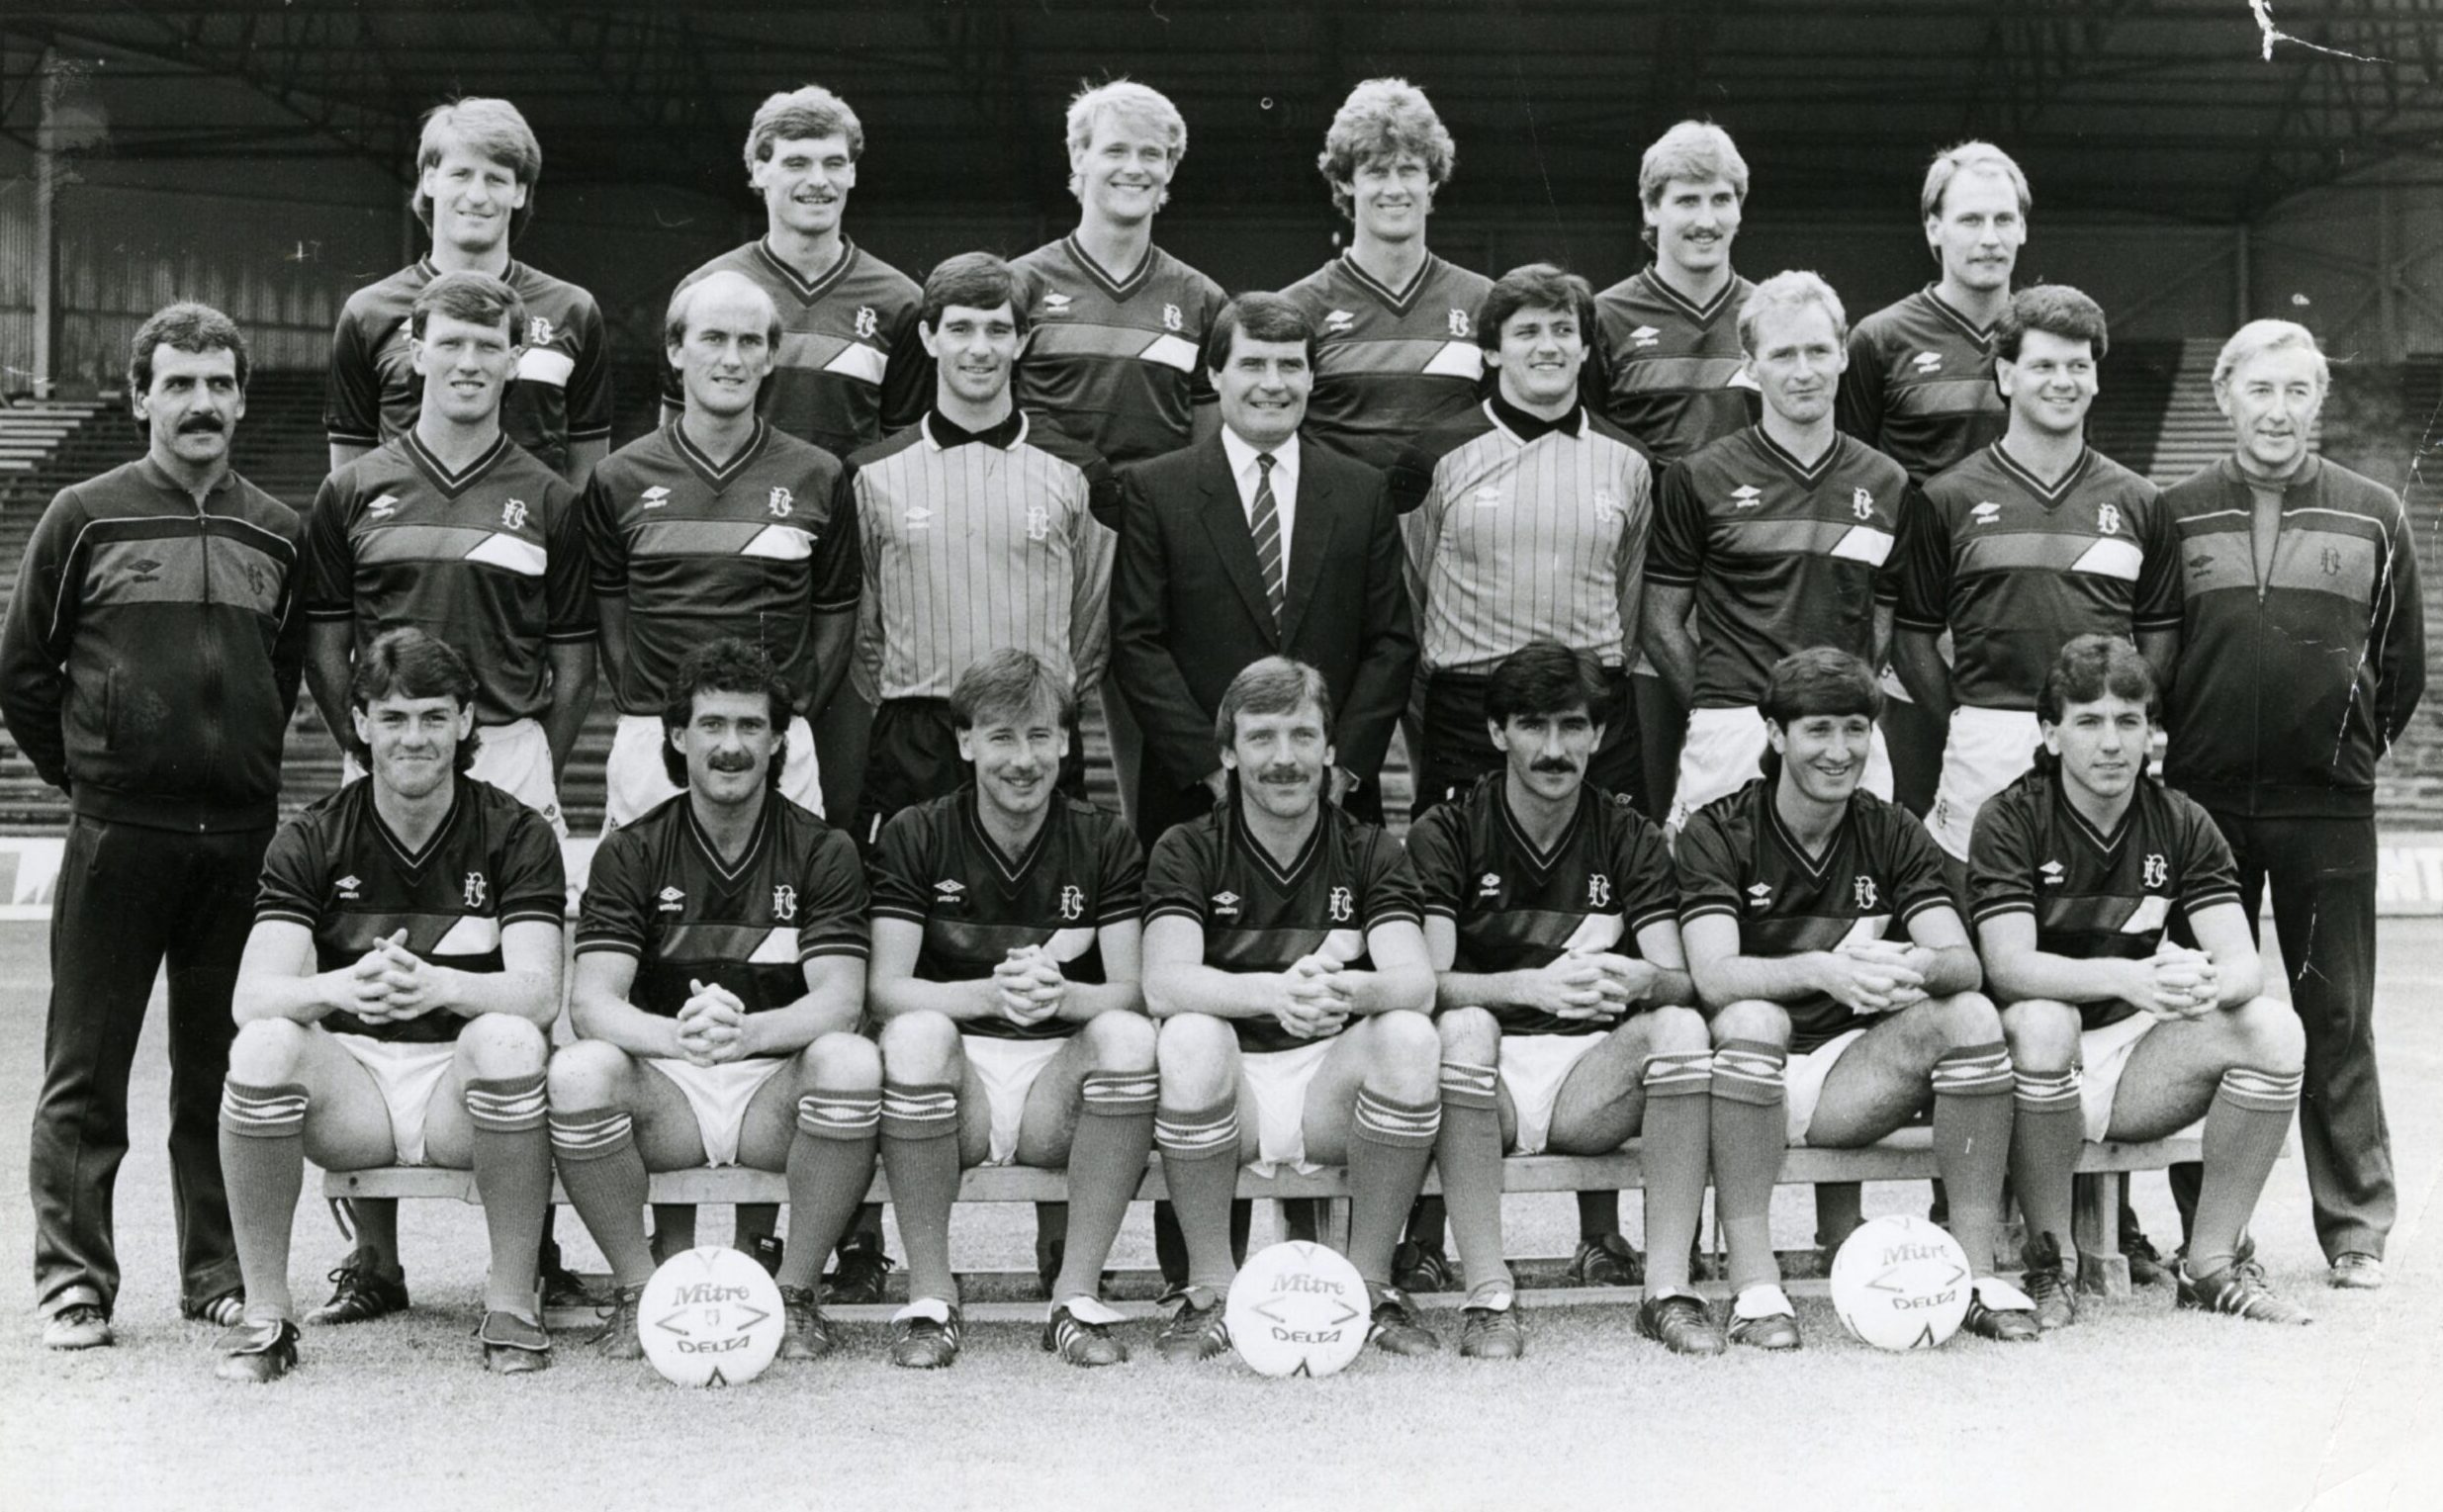 The Dundee FC team photo, featuring the 1985/86 strip